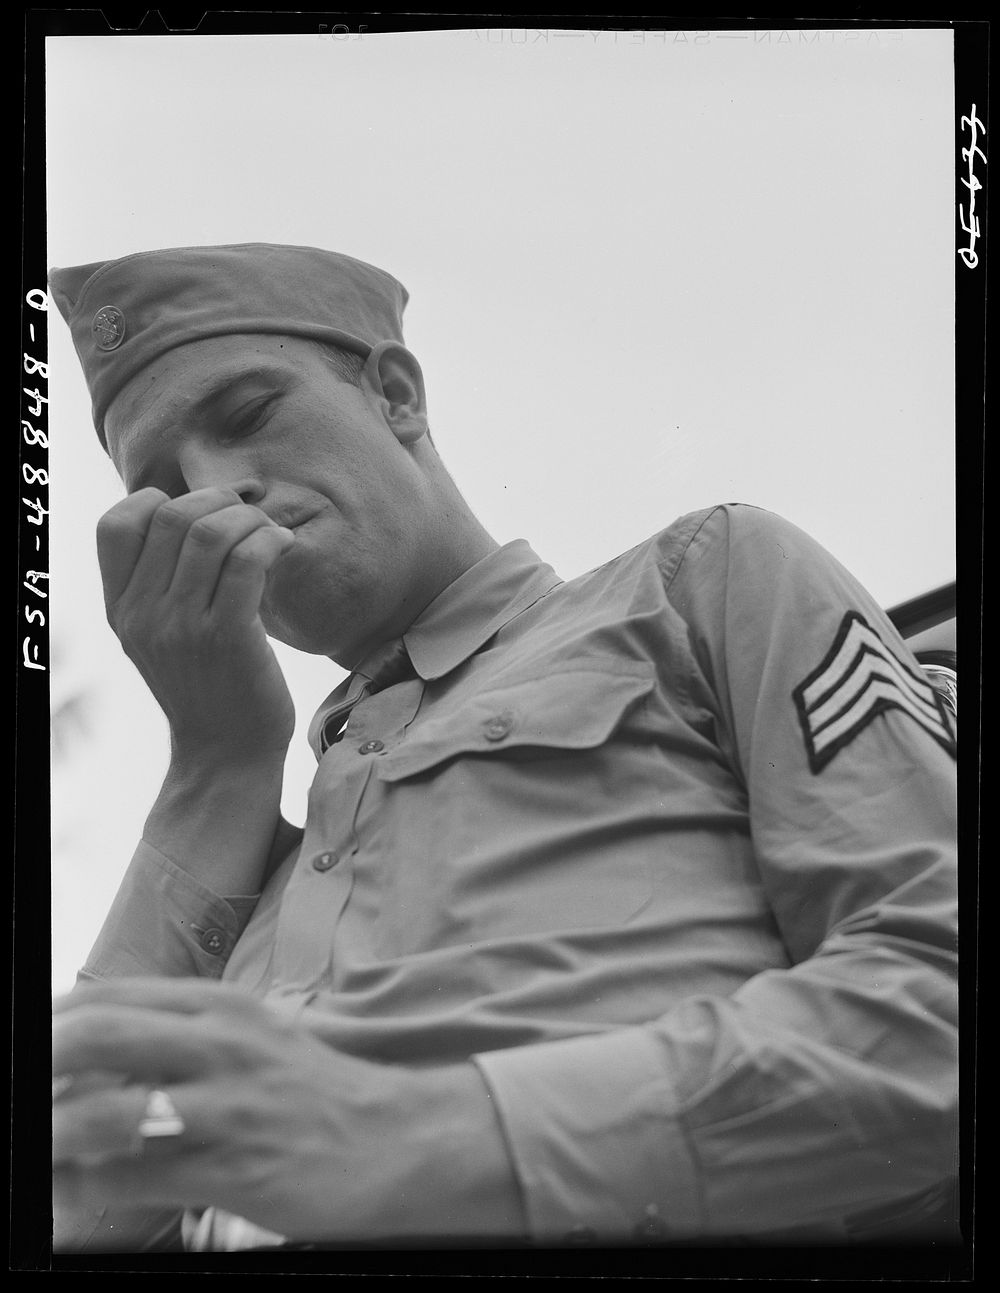 Camp Shelby, Hattiesburg, Mississippi. A soldier. Sourced from the Library of Congress.